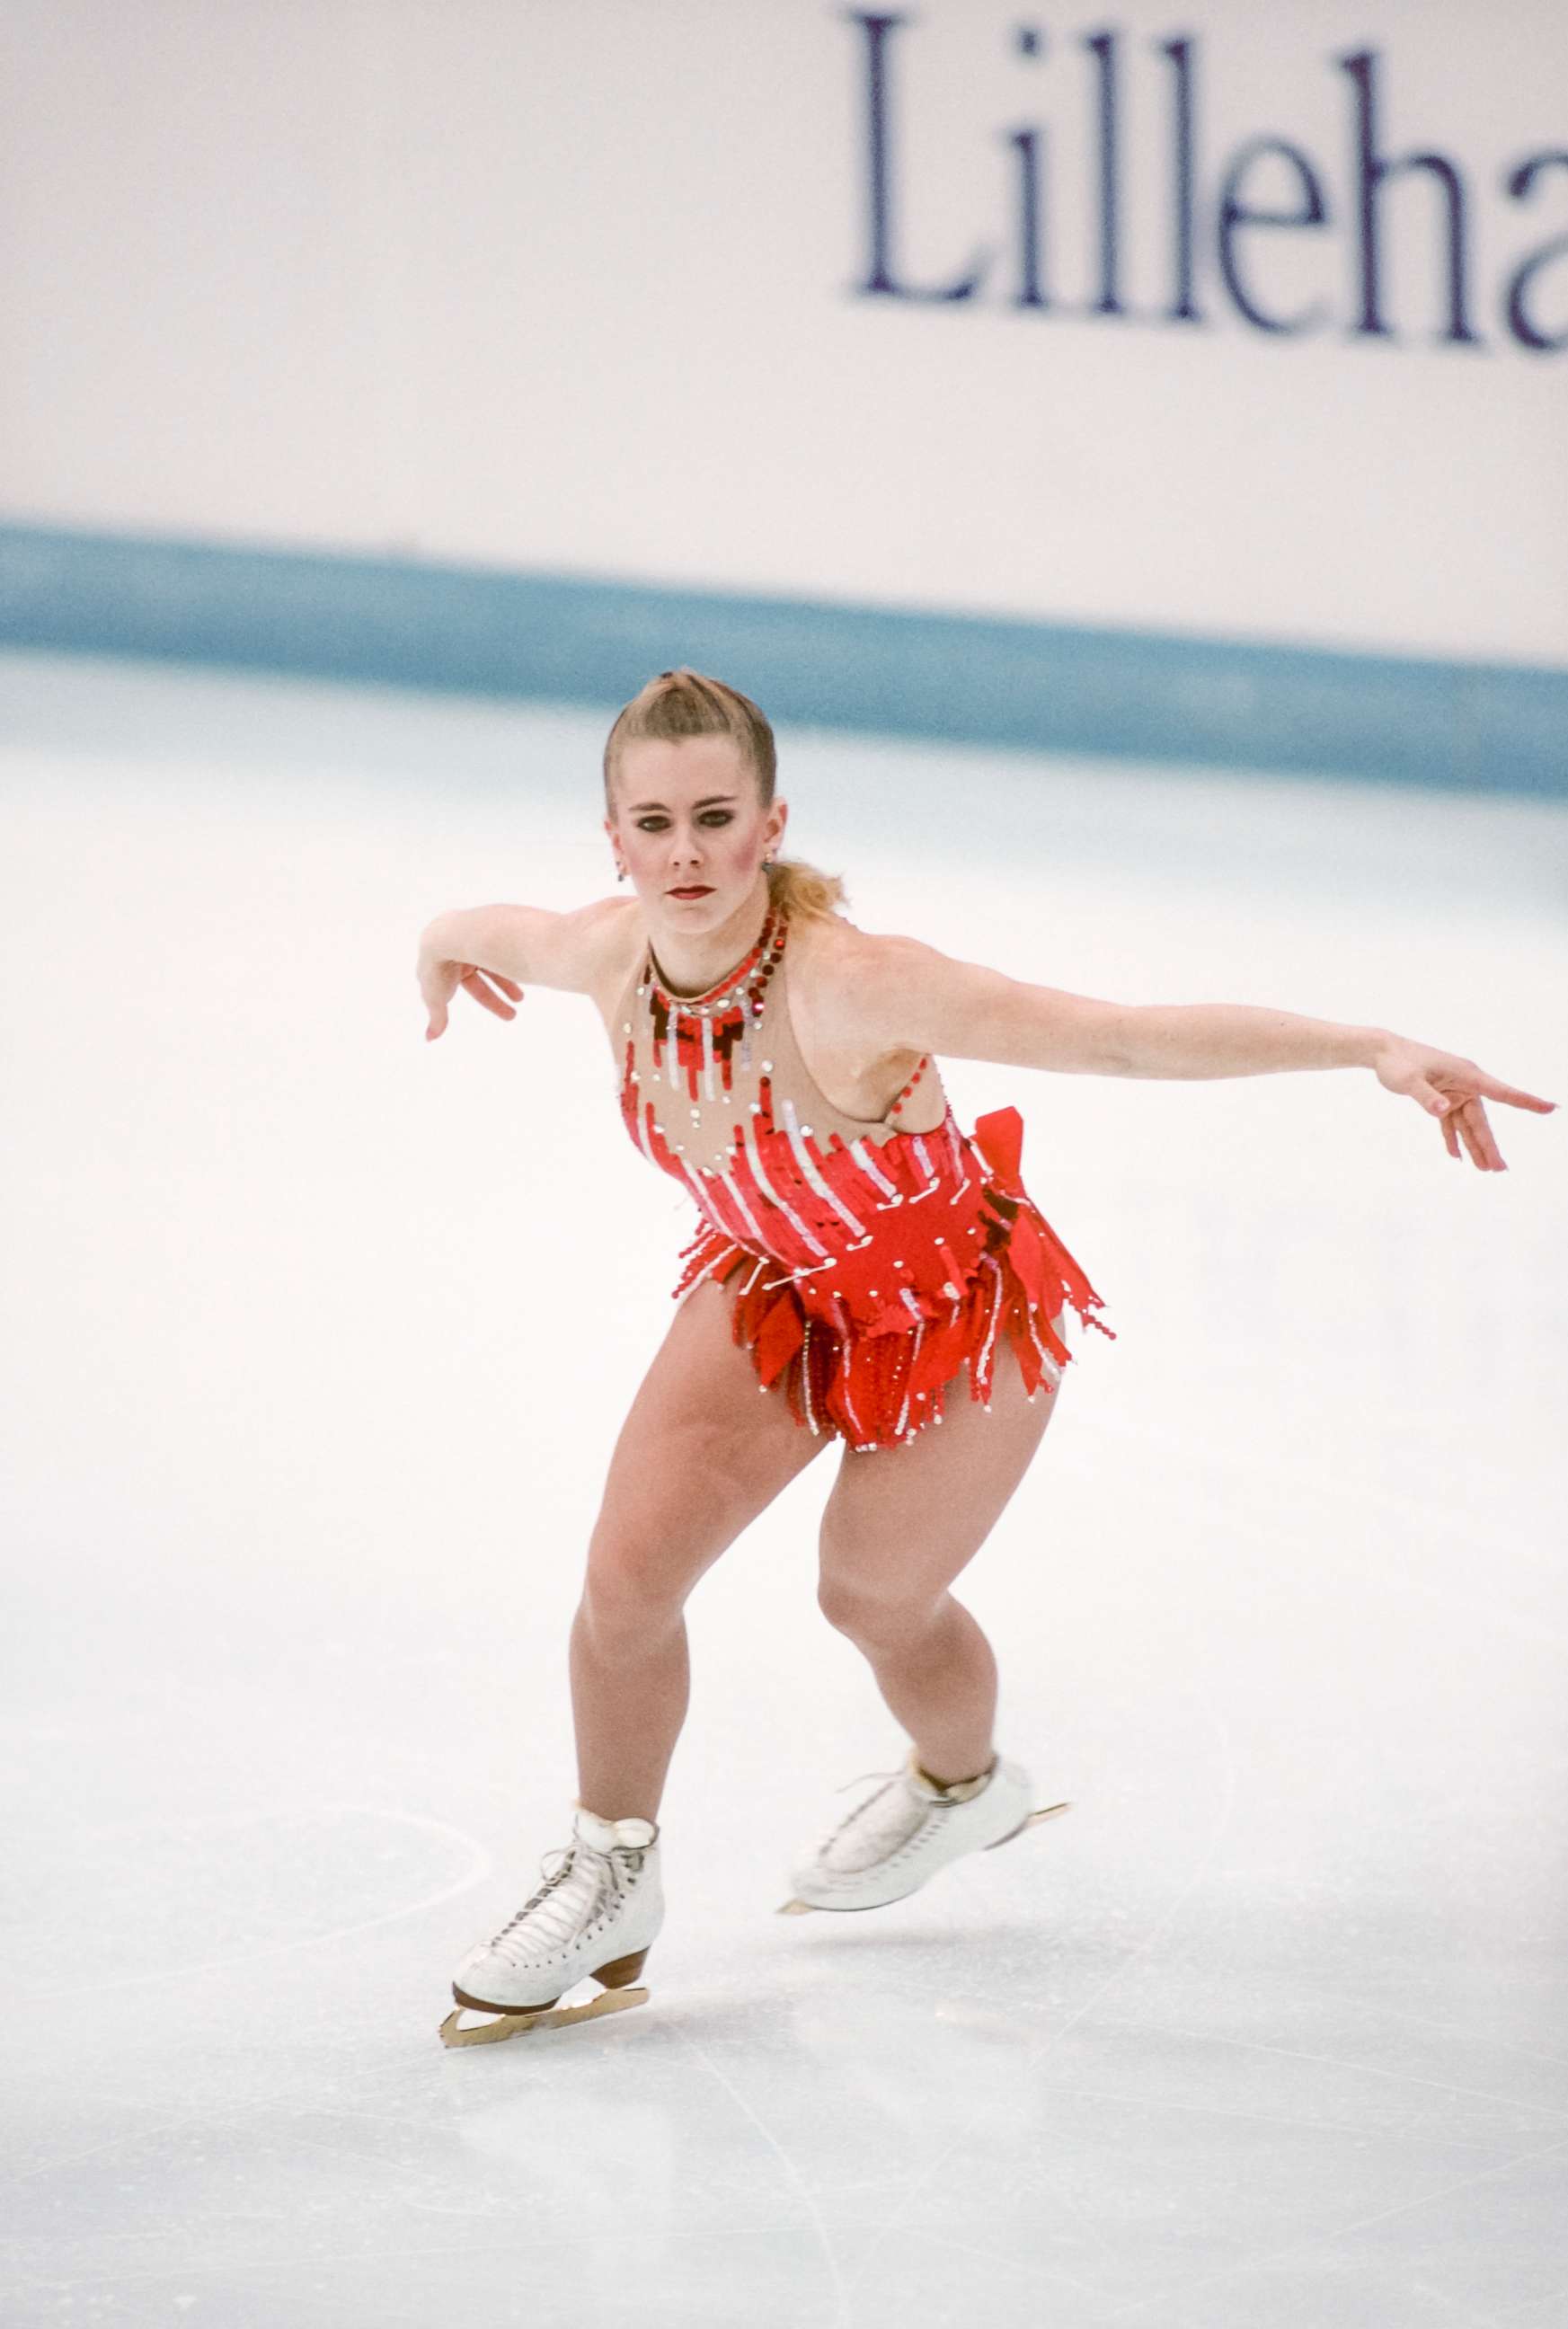 PHOTO: Tonya Harding competes in the Technical Program portion of the Women's Figure Skating competition of the 1994 Winter Olympics on Feb. 23, 1994 at the Hamar Olympic Hall in Lillehammer, Norway.